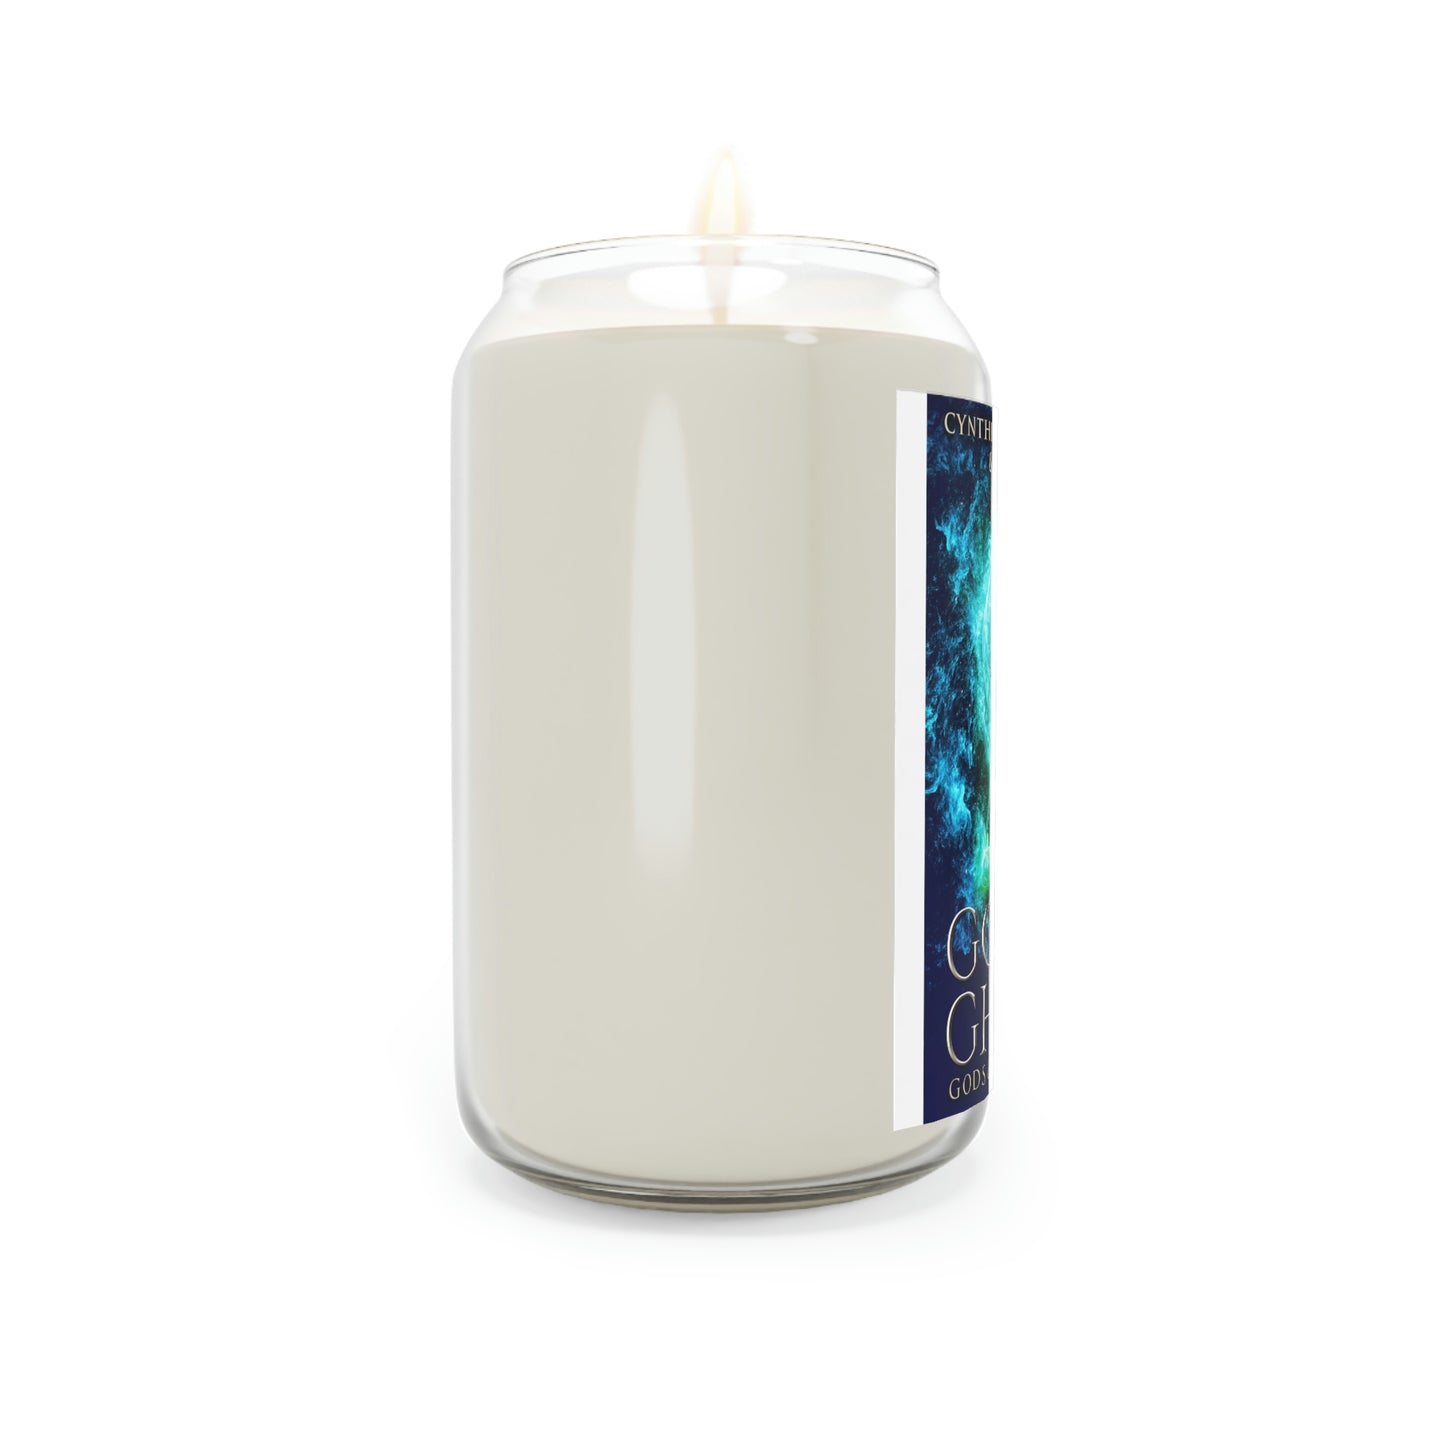 Gods & Ghosts - Scented Candle